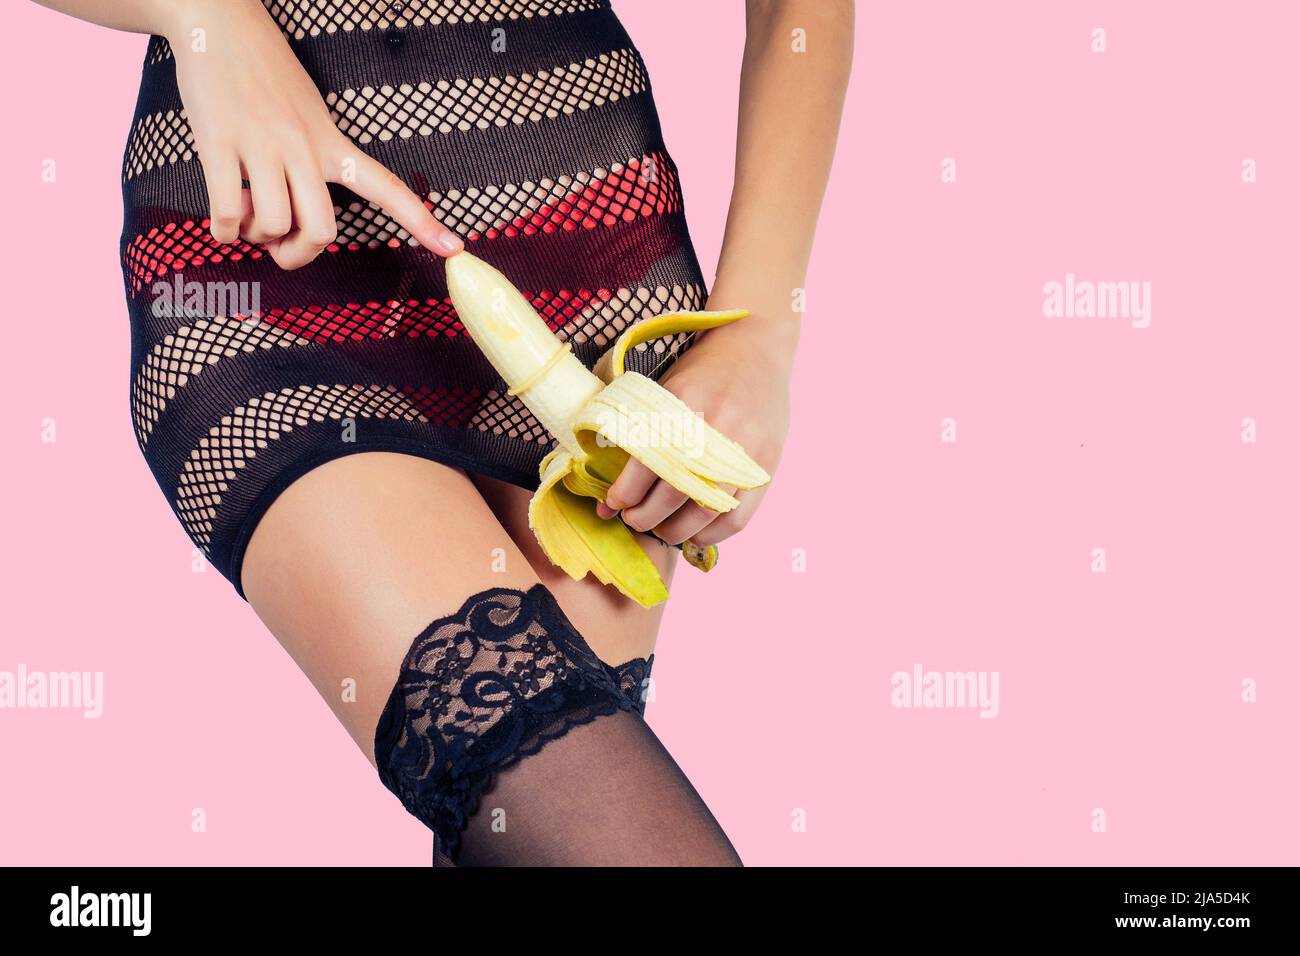 Closeup of a sexy woman body in red panties and black sexy transparent dress stockings touching a banana in a condom on pink background in the studio Stock Photo